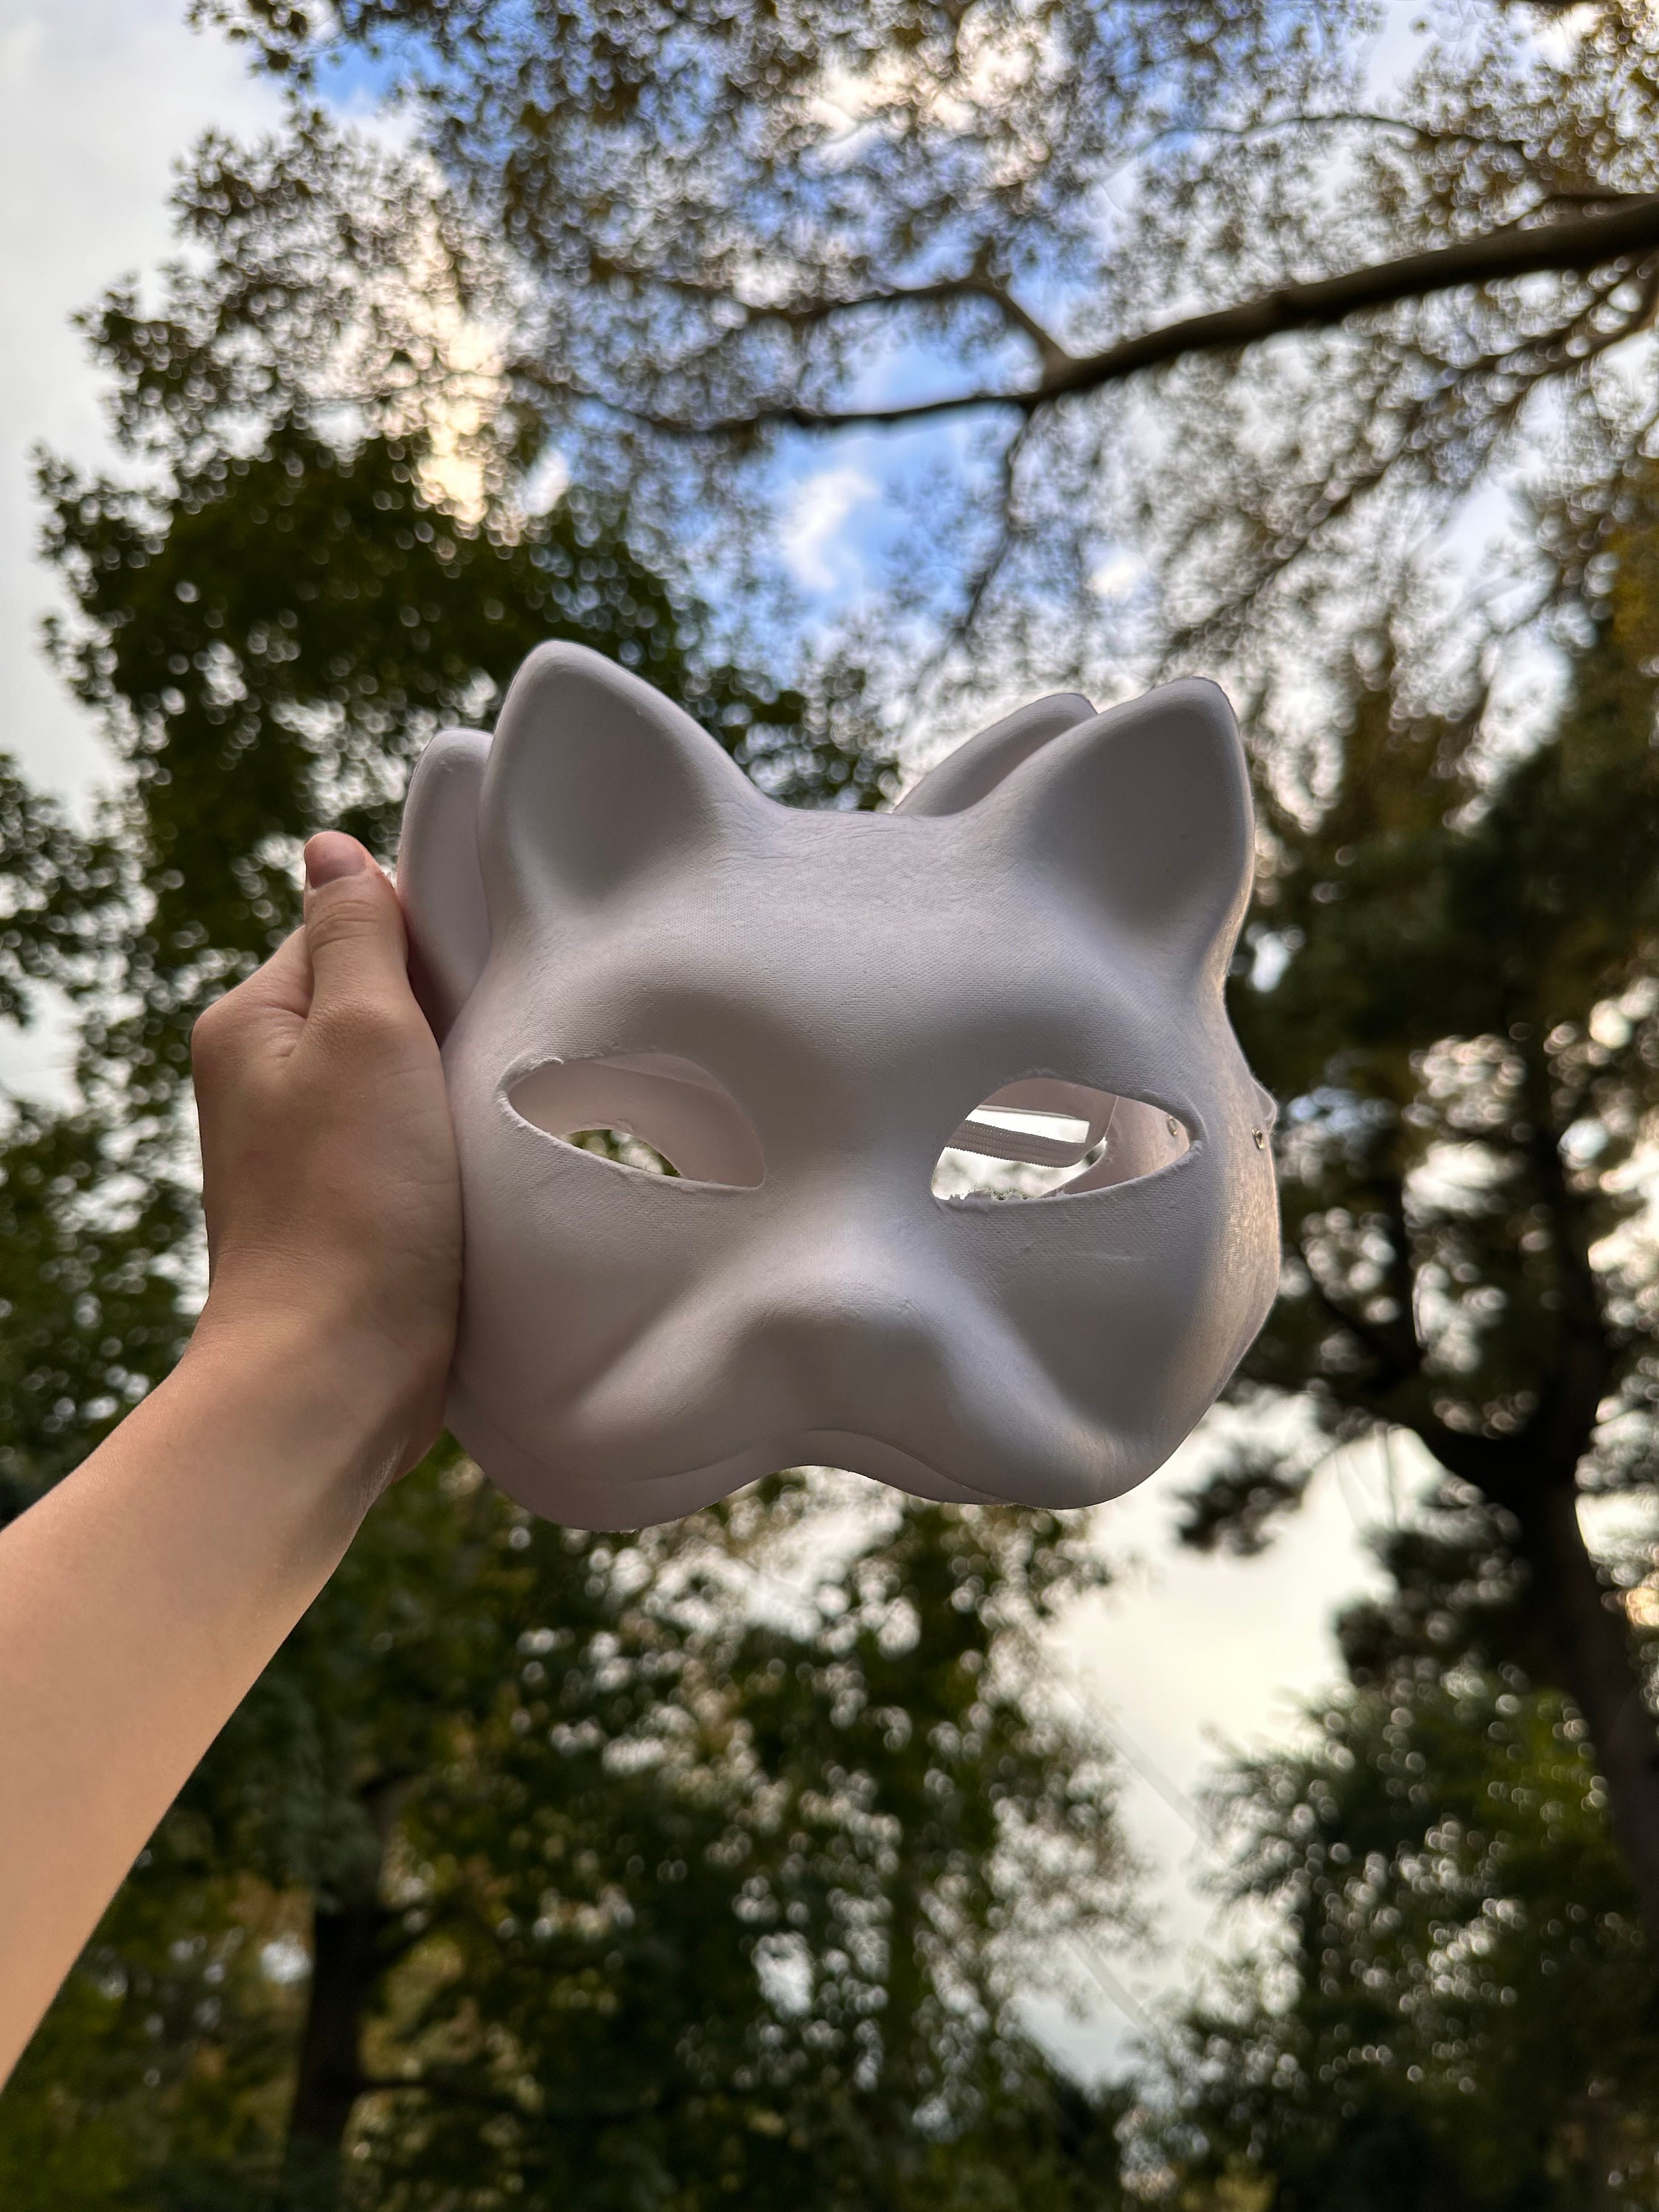 LOGOFUN 20 Pcs Cat Masks for Kids Therian Mask White Paper Blank DIY  Unpainted Animal Mask Cosplay Halloween Masquerade Party Costume Accessory